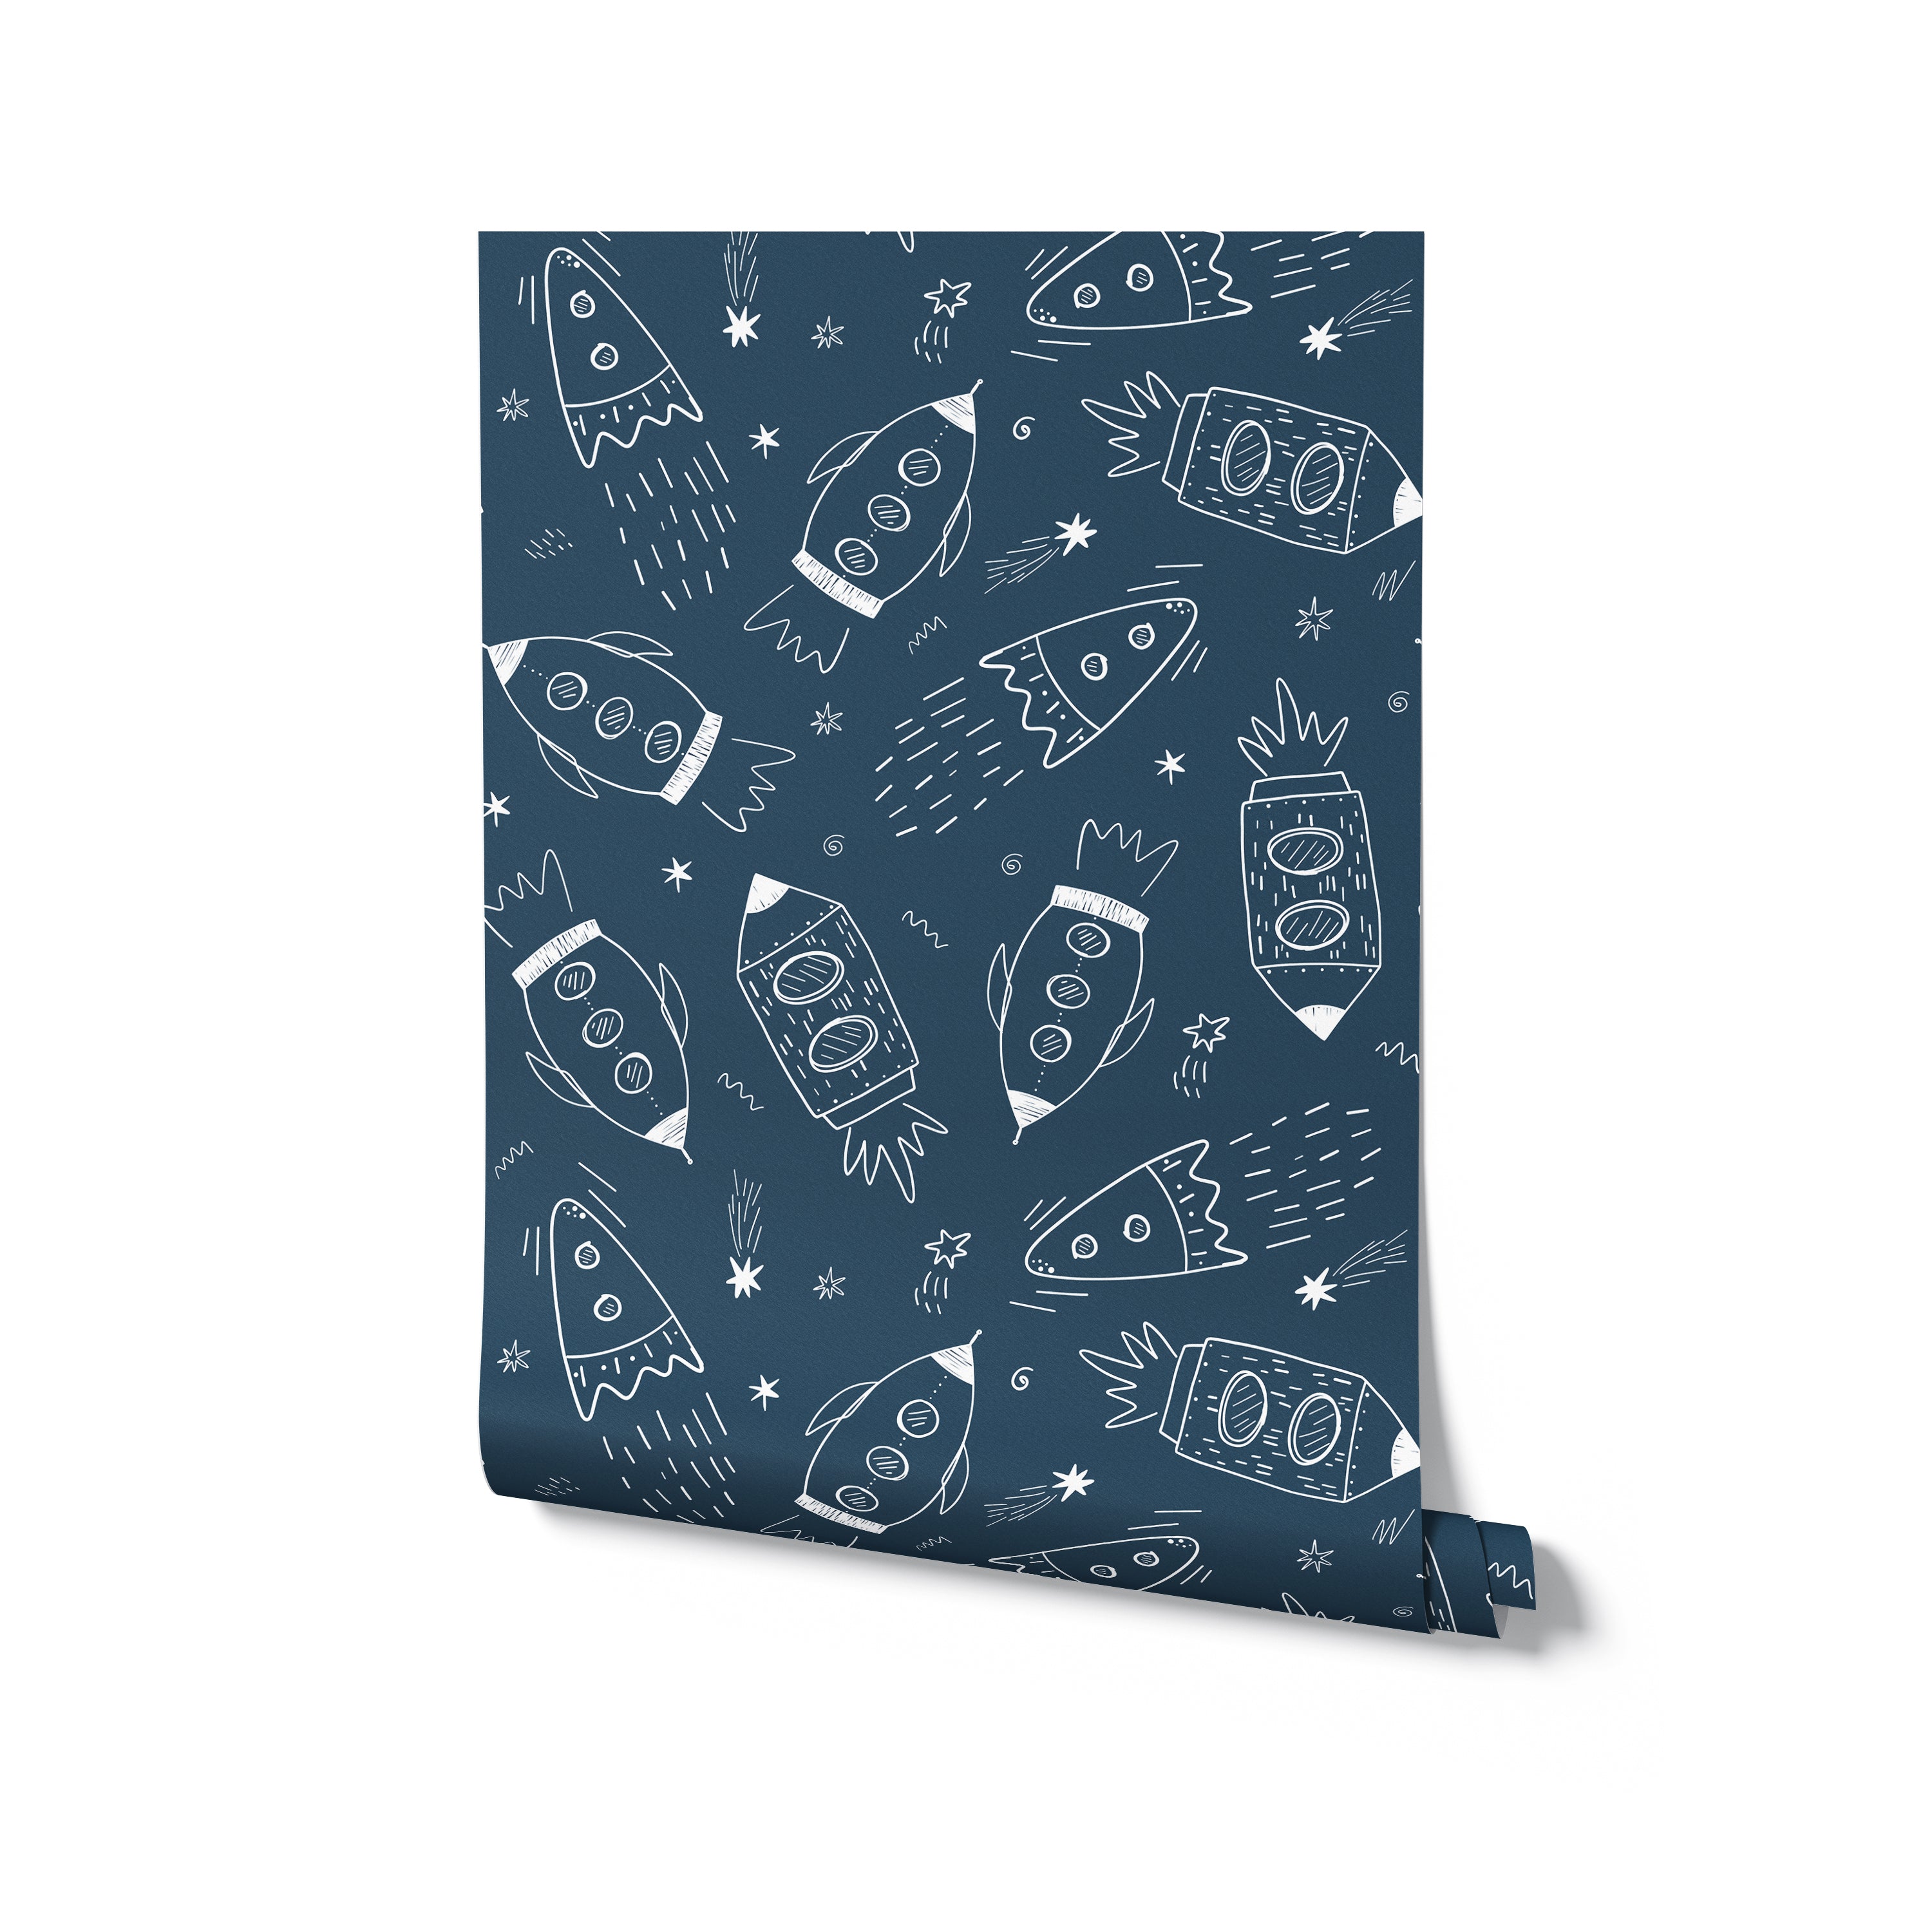 Rolled wallpaper featuring white doodle illustrations of rockets on a navy blue background for a whimsical space theme.